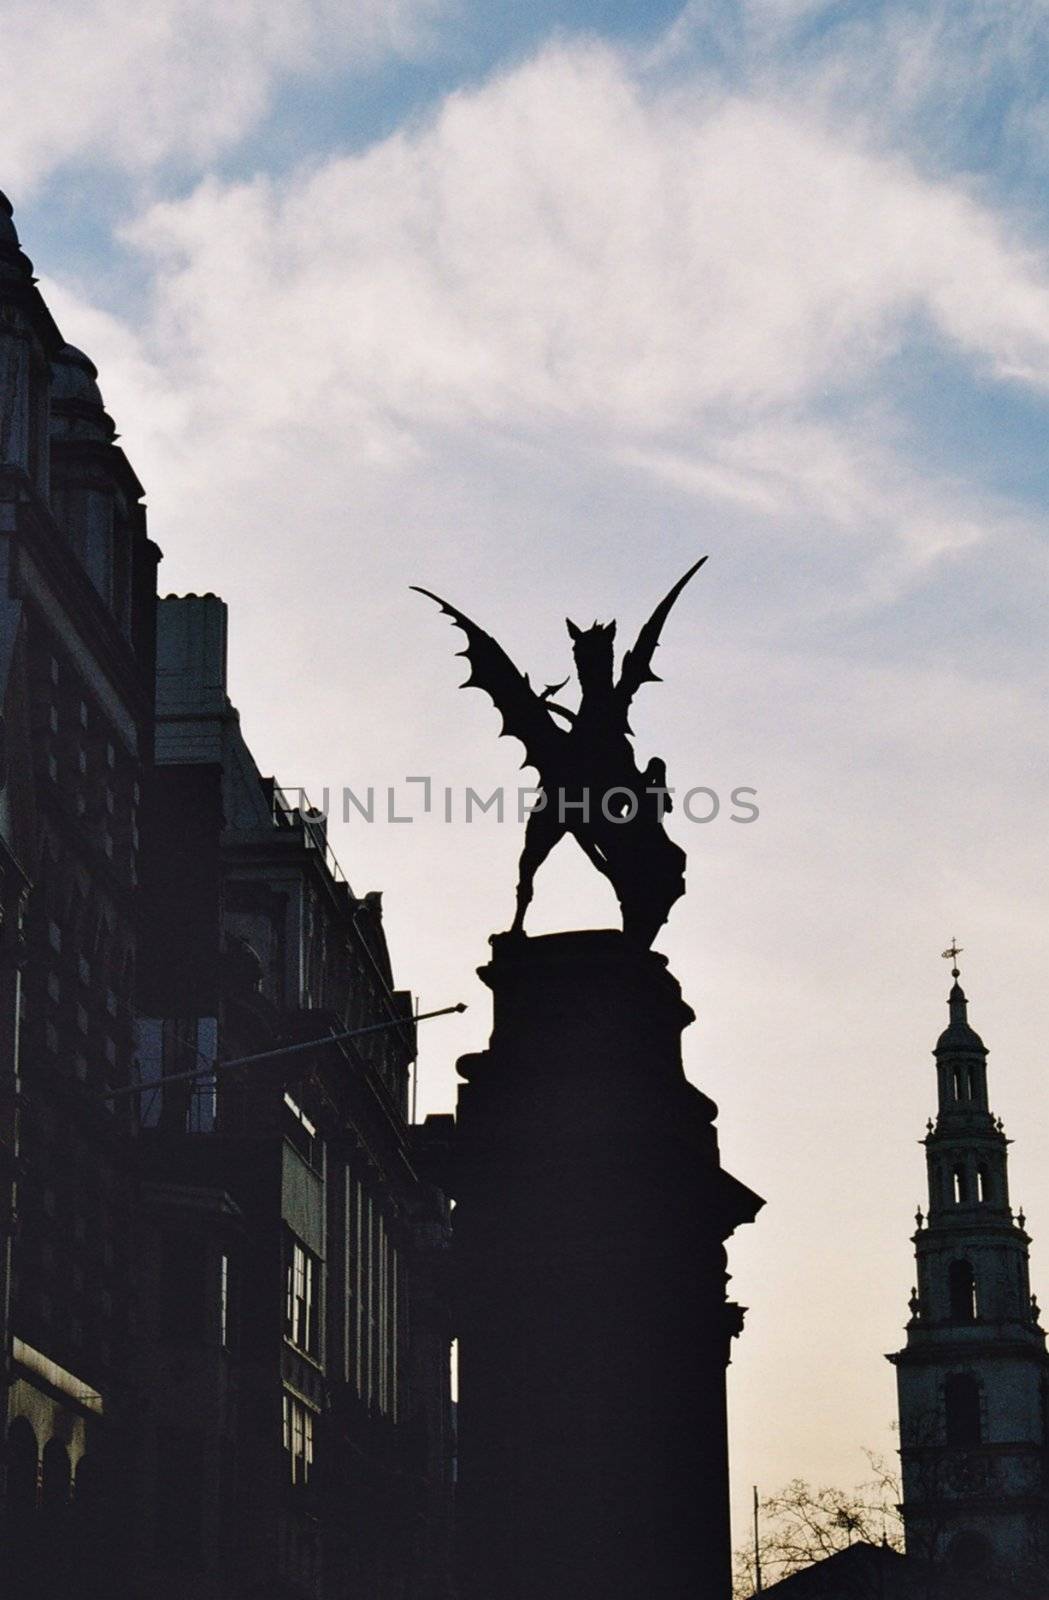 one of the dragons who guards the border of the city of london